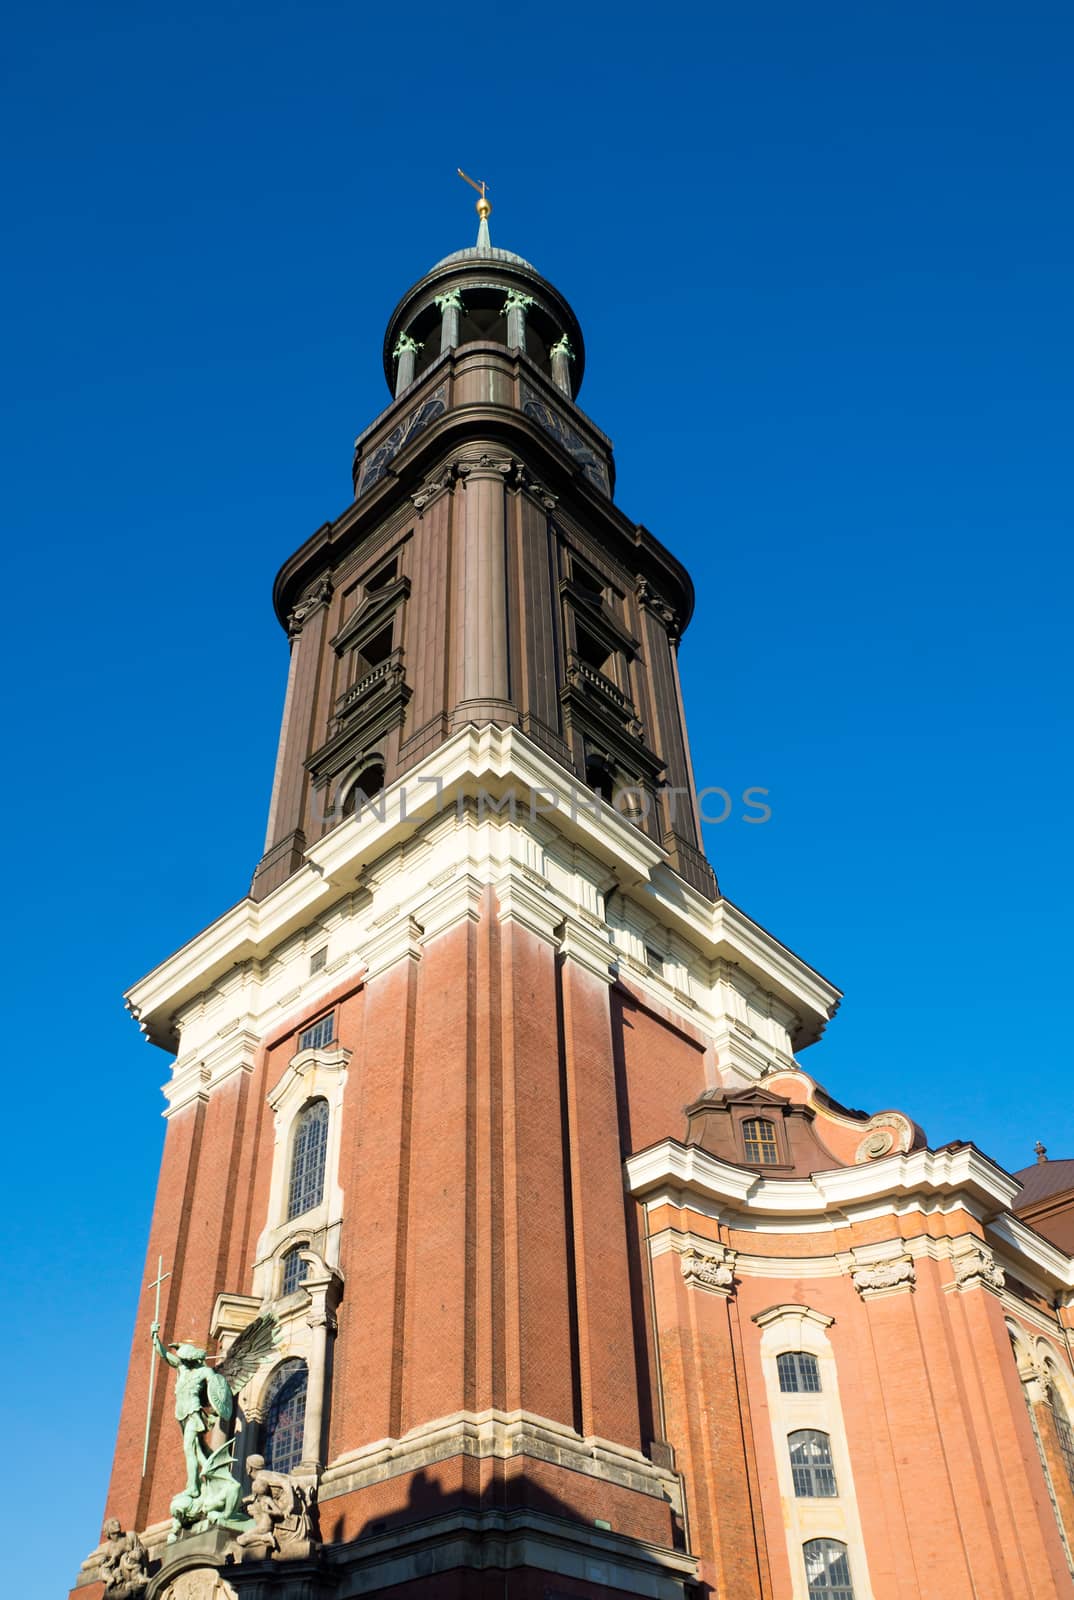 The tower of the famous St. Michael church in Hamburg, Germany